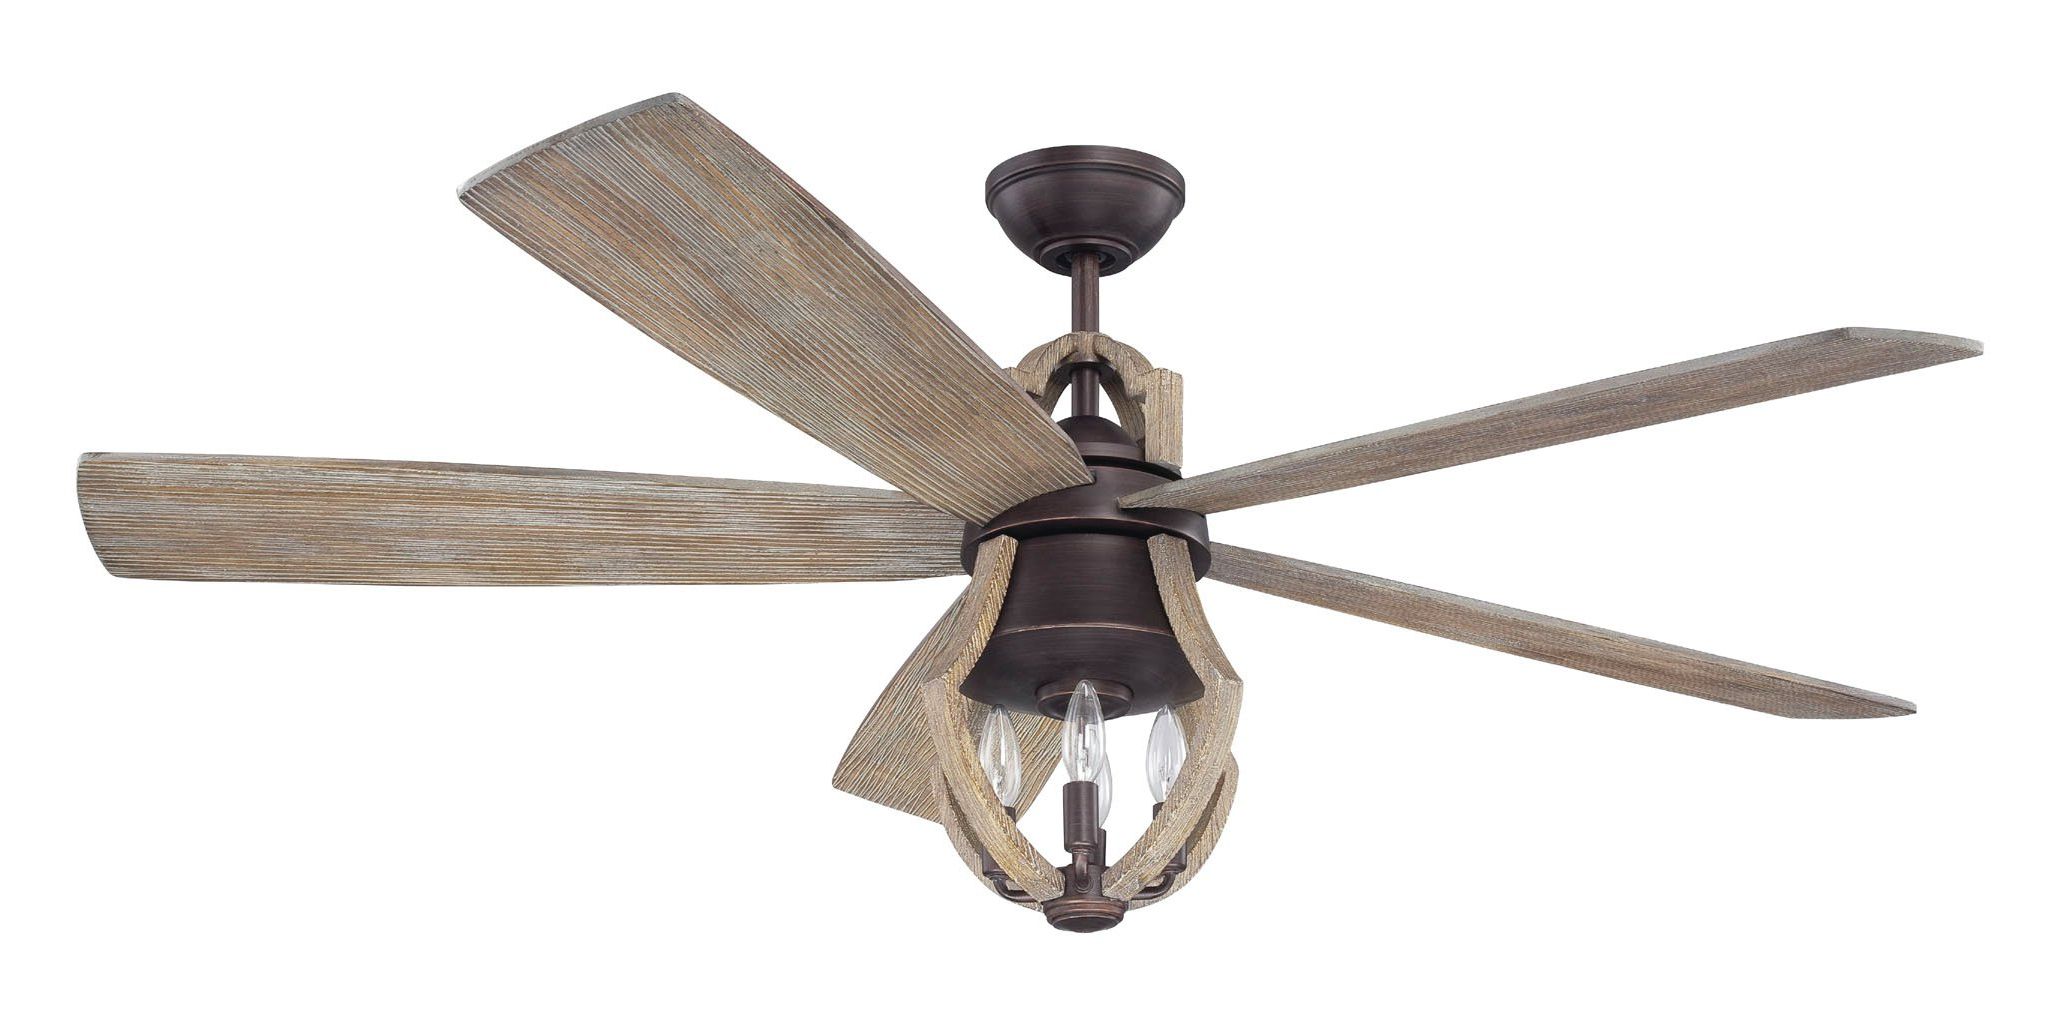 Birch Lane In Recent Lazlo 3 Blade Ceiling Fans With Remote (View 17 of 20)